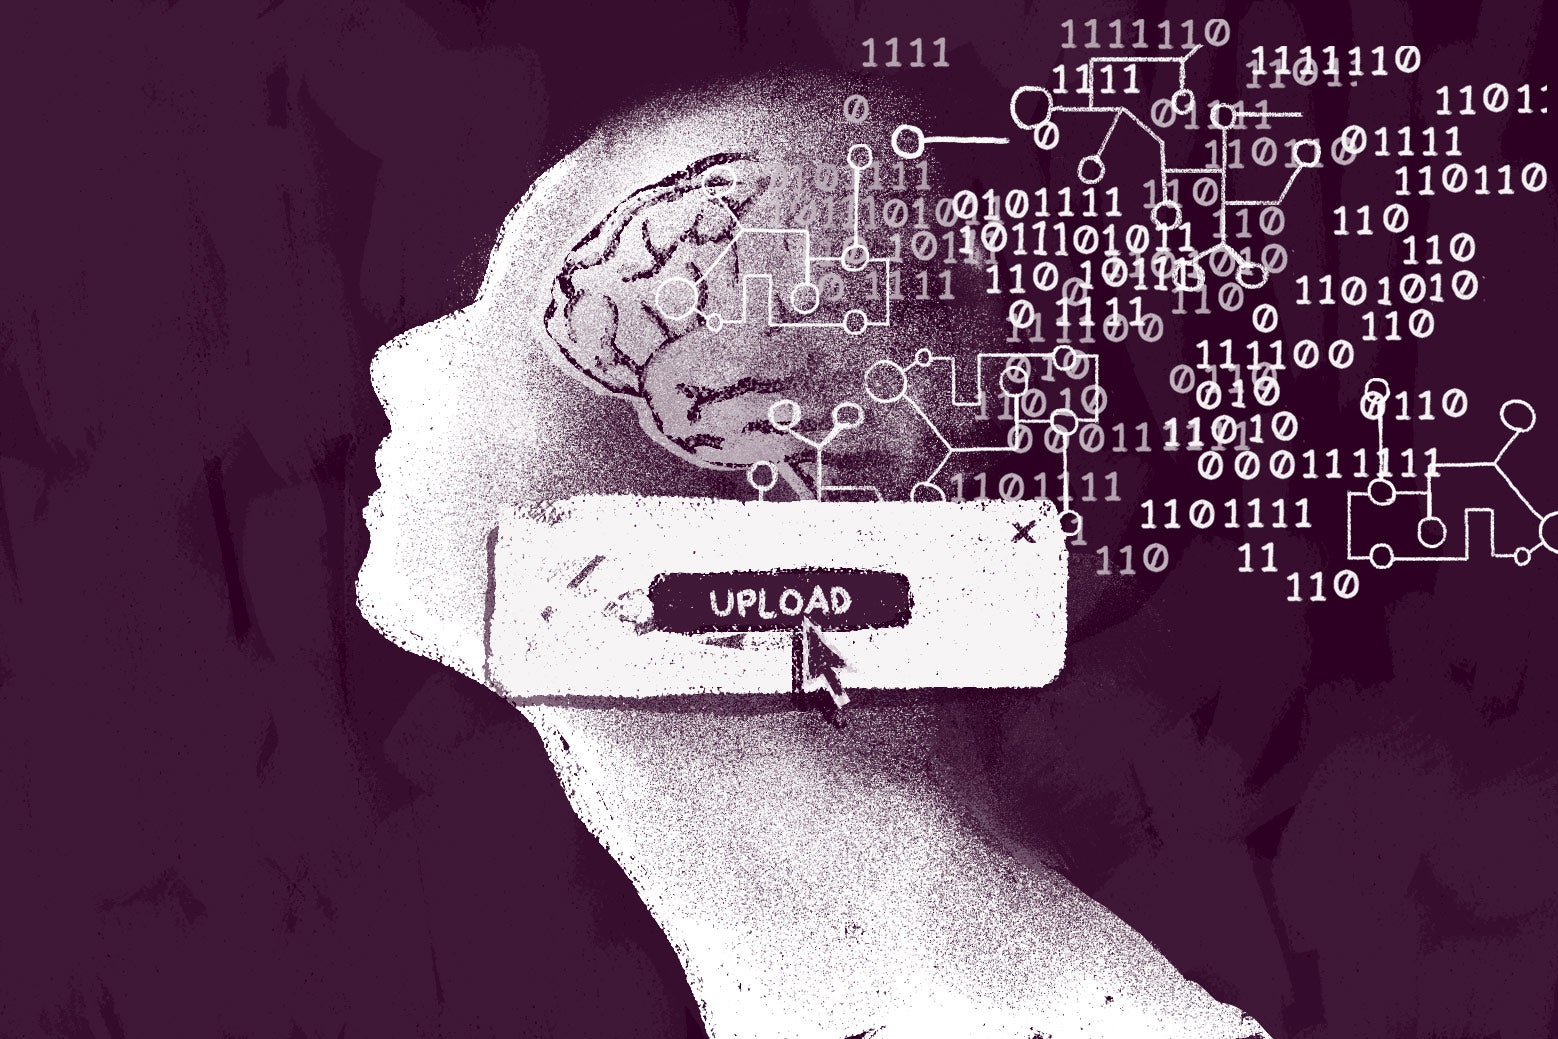 Illustration of a brain being uploaded to digital numbers.